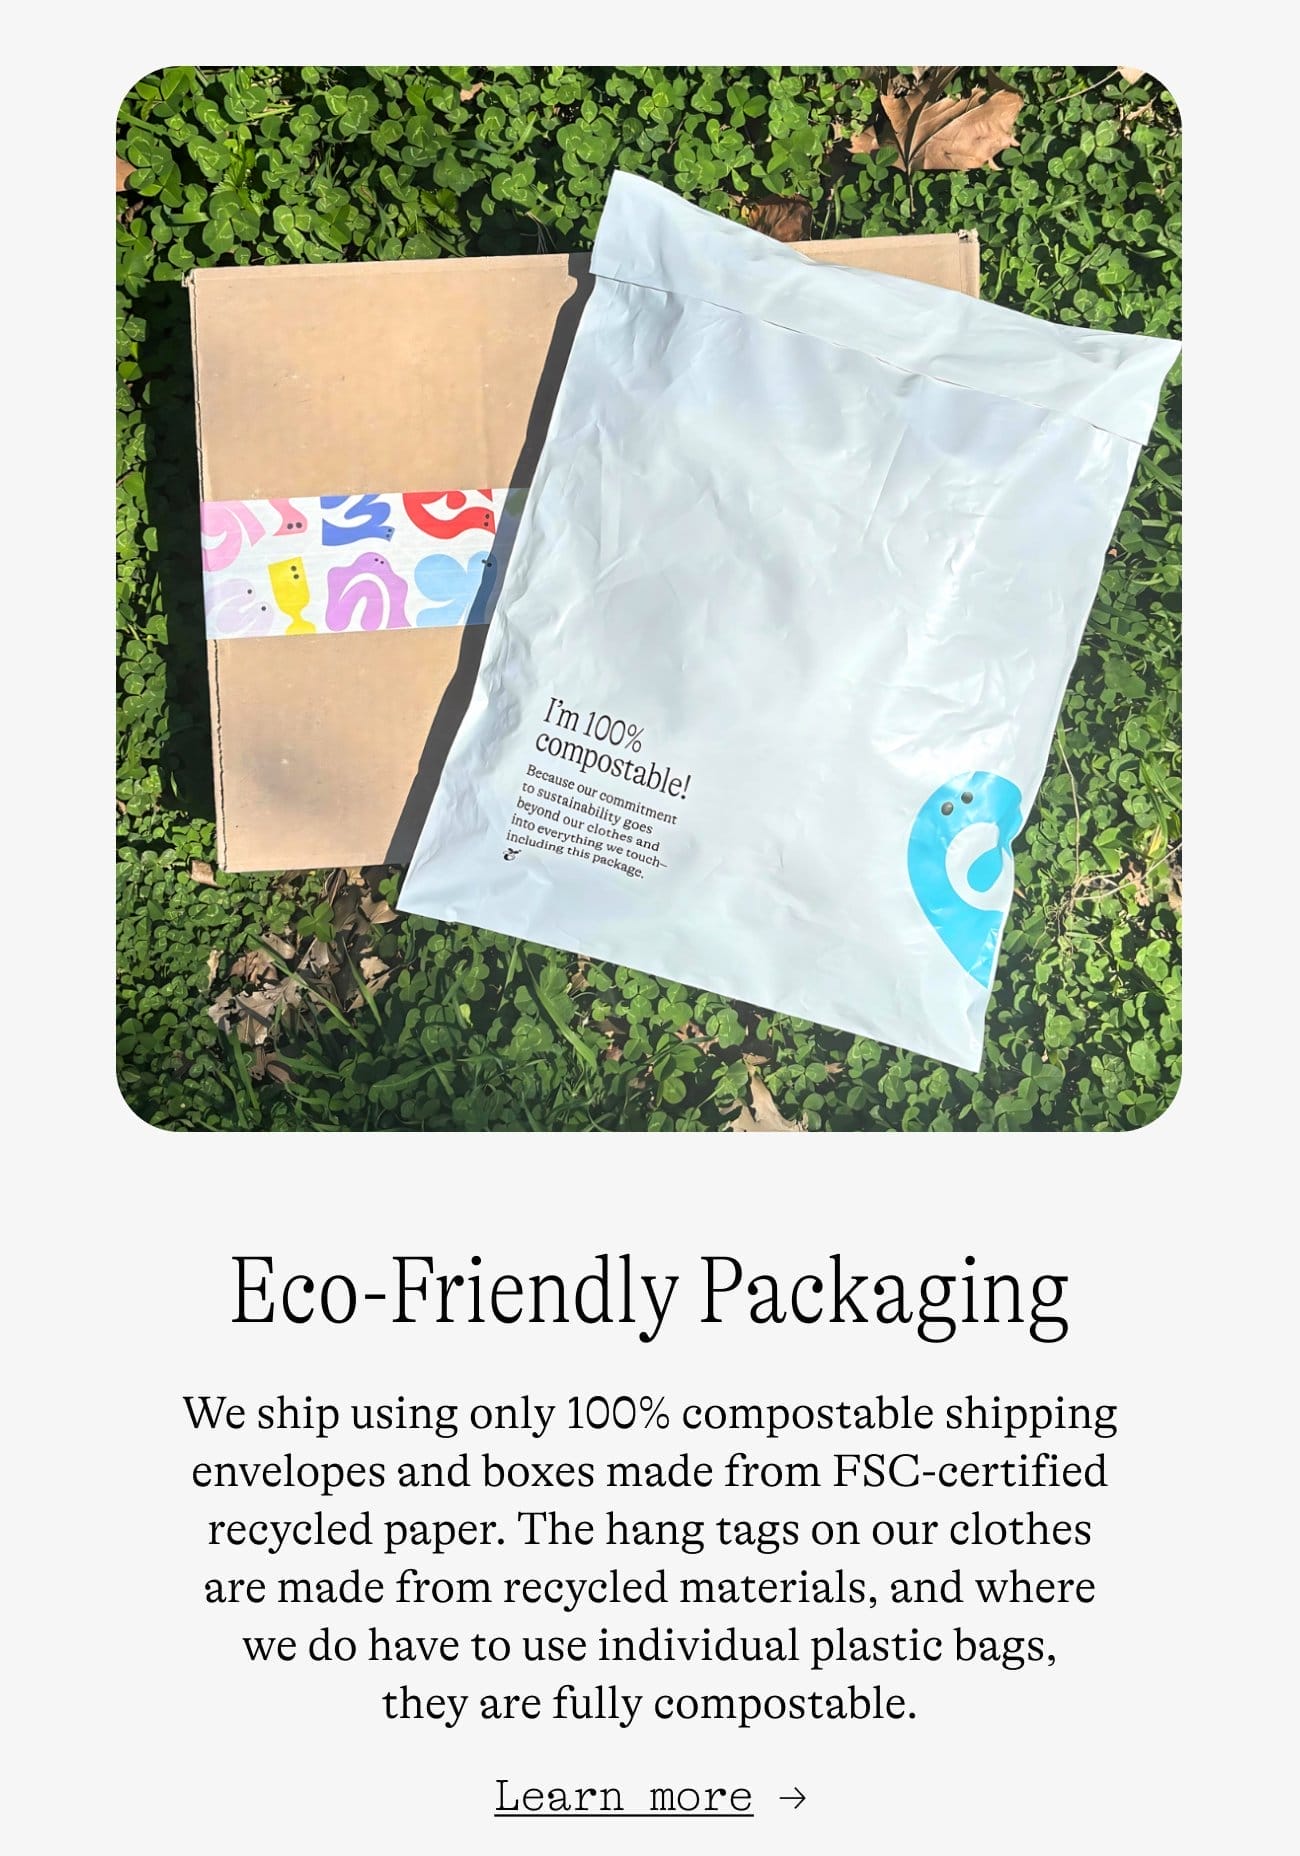 Eco-Friendly Packaging. We ship using only 100% compostable shipping envelopes and boxes made from FSC-certified recycled paper. The hang tags on our clothes are made from recycled materials, and where we do have to use individual plastic bags, they are fully compostable. Learn more